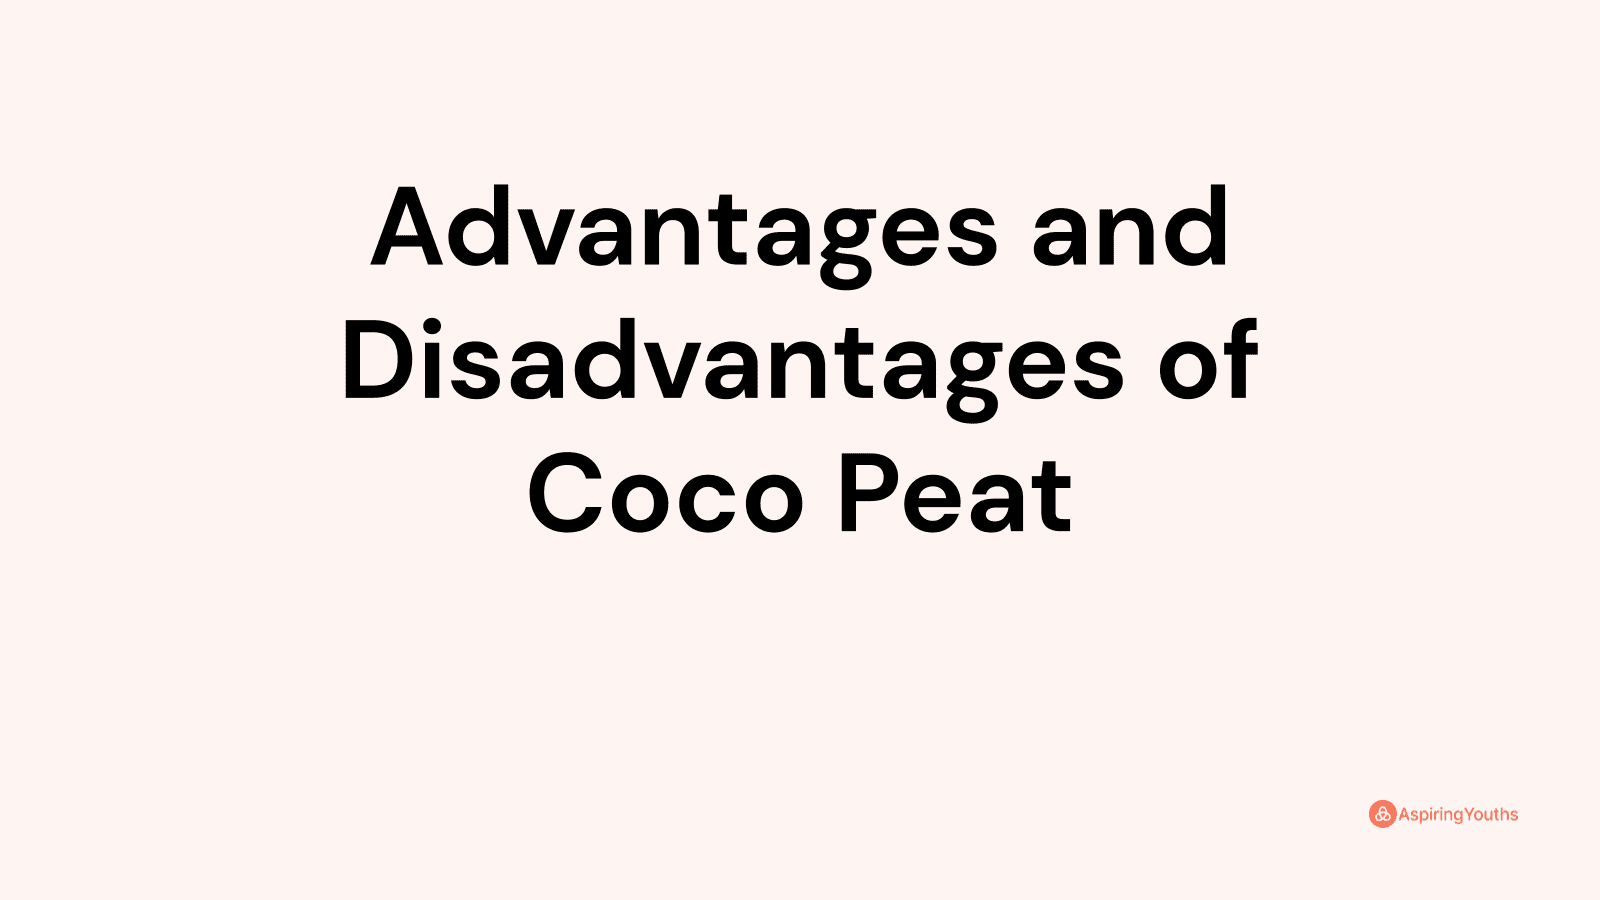 Advantages and disadvantages of Coco Peat